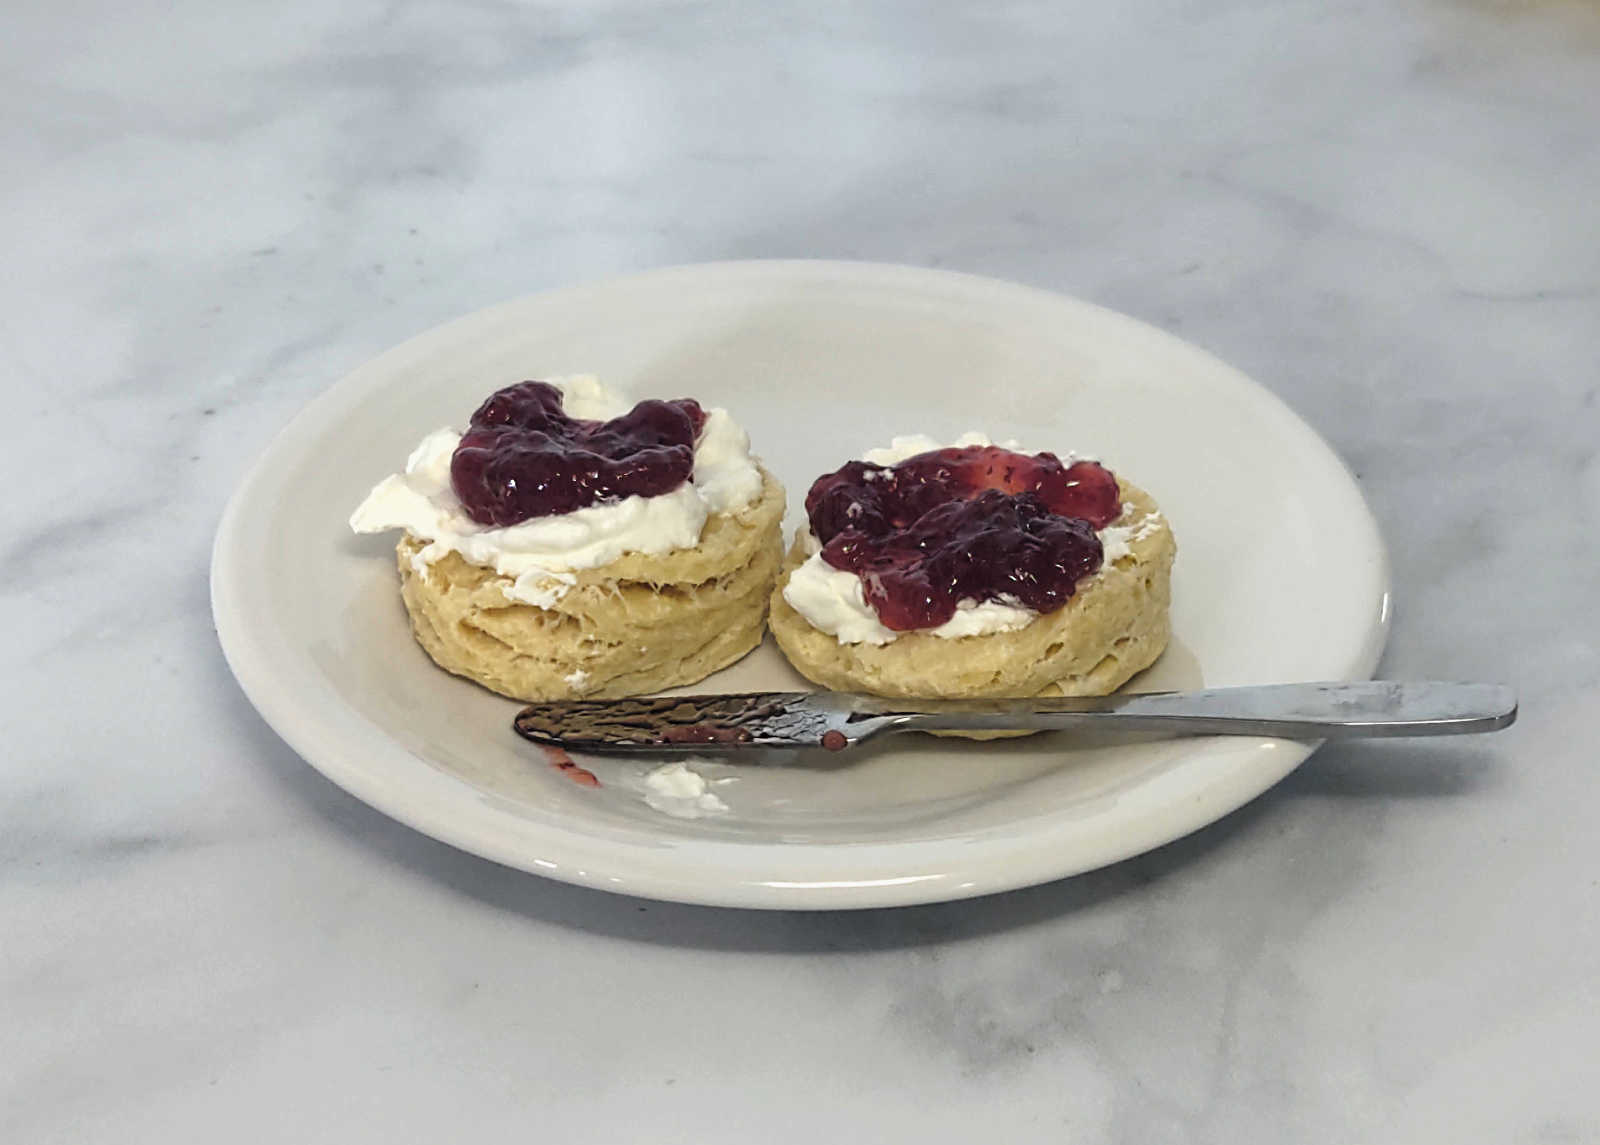 Afternoon Tea: Scones With Clotted Cream and Jam